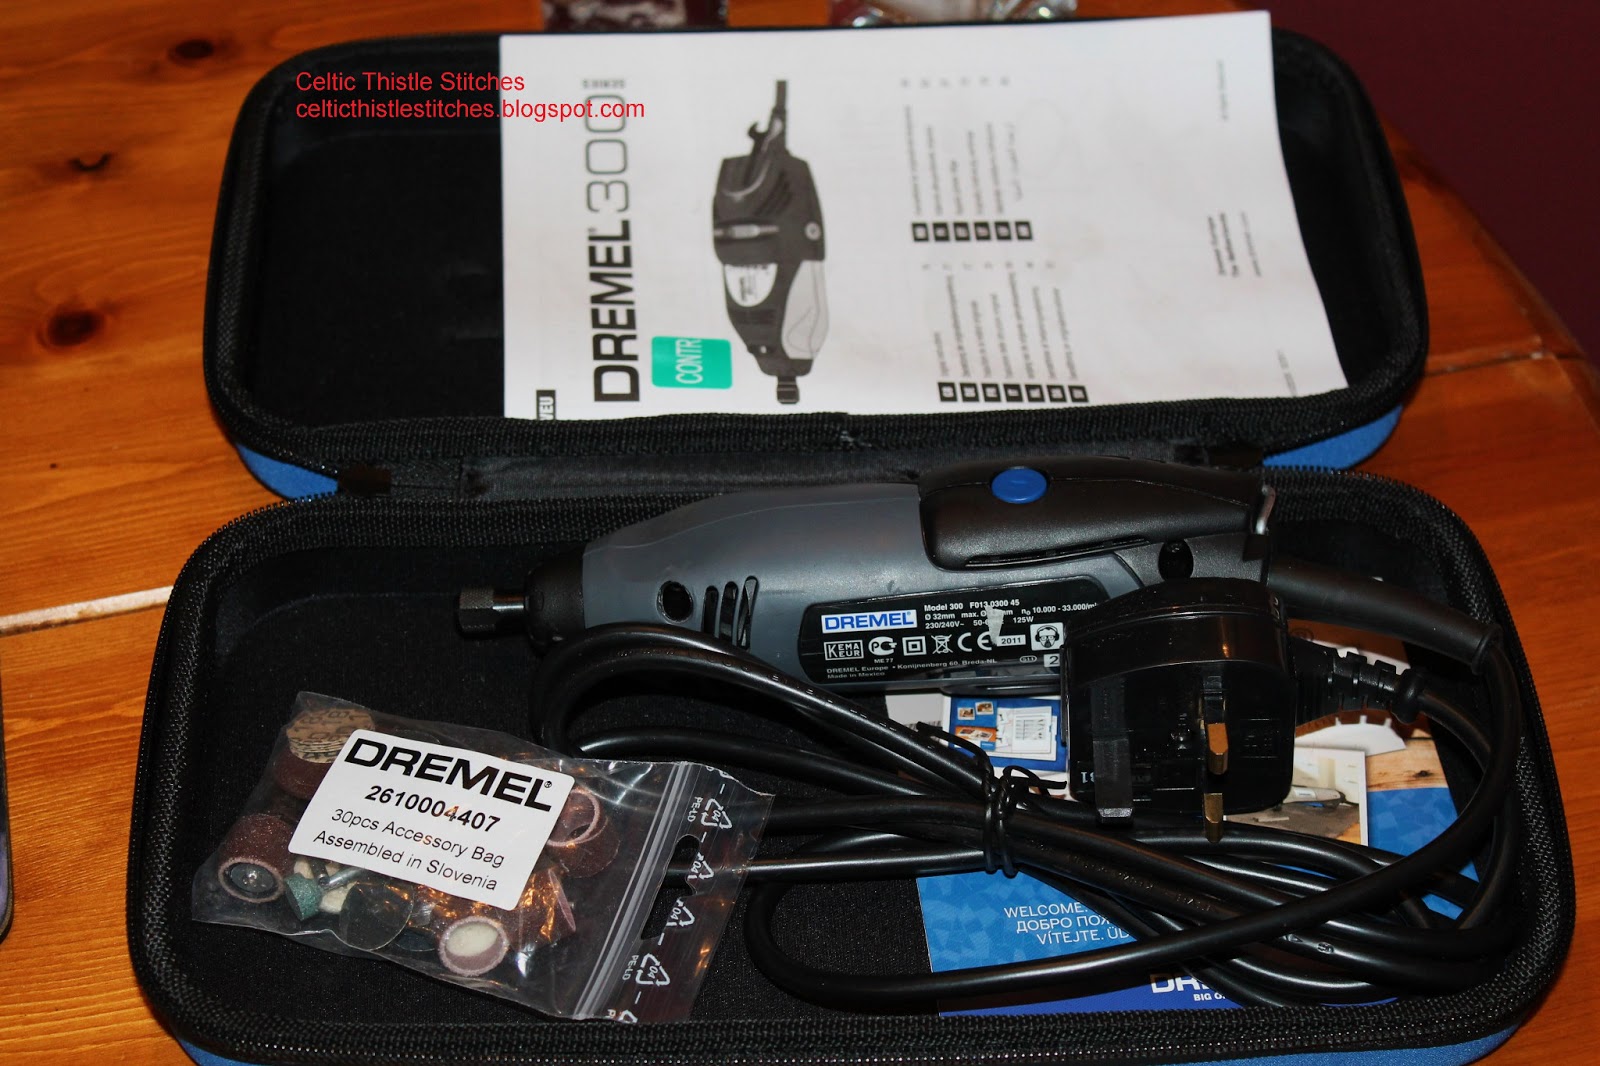 Dremel 300 Drill and accessories in carry case